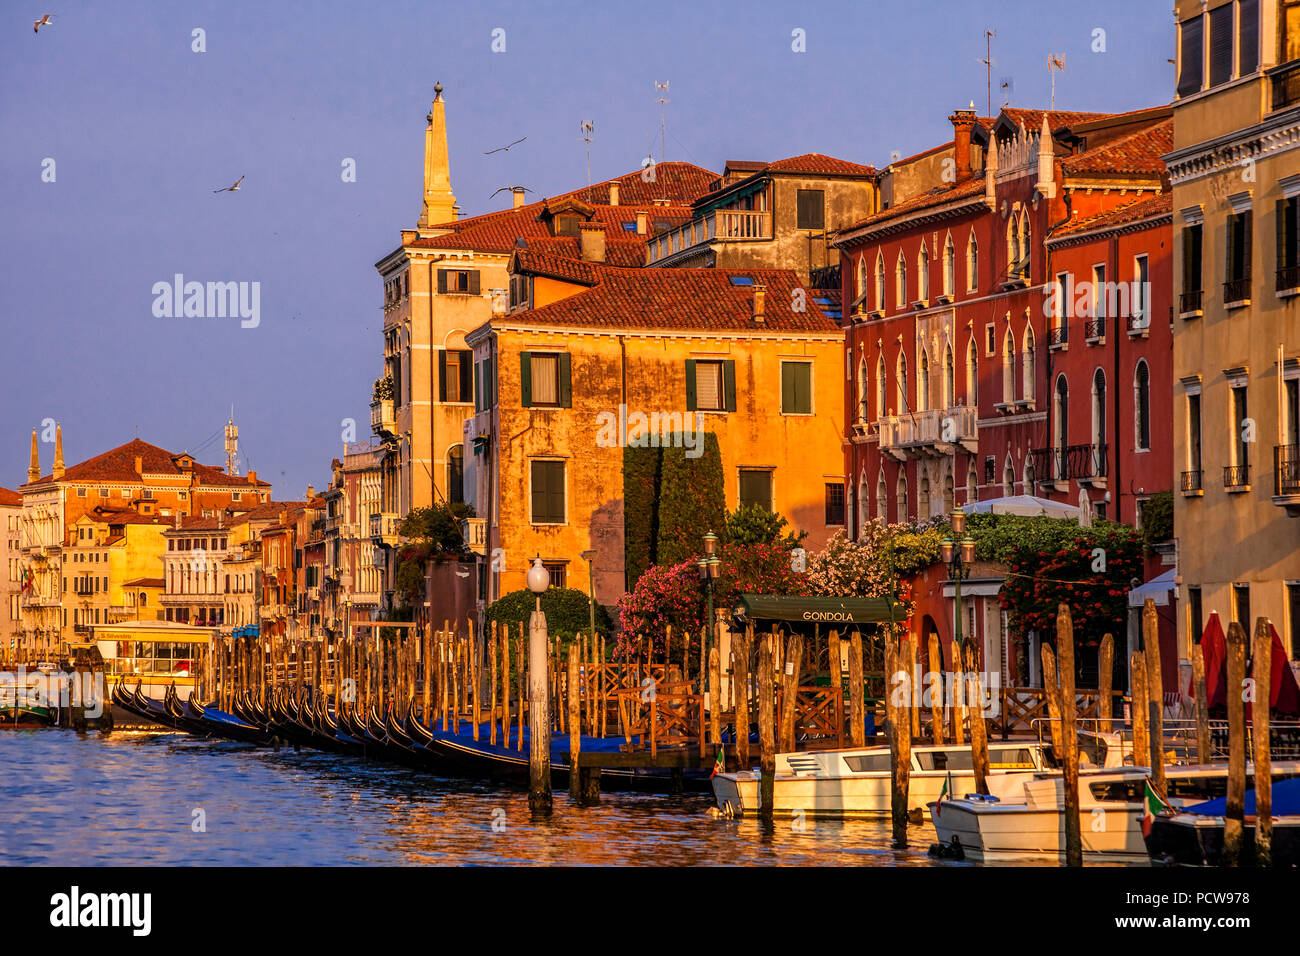 Gondolas parked on the Grand Canal in Venice, Italy Stock Photo